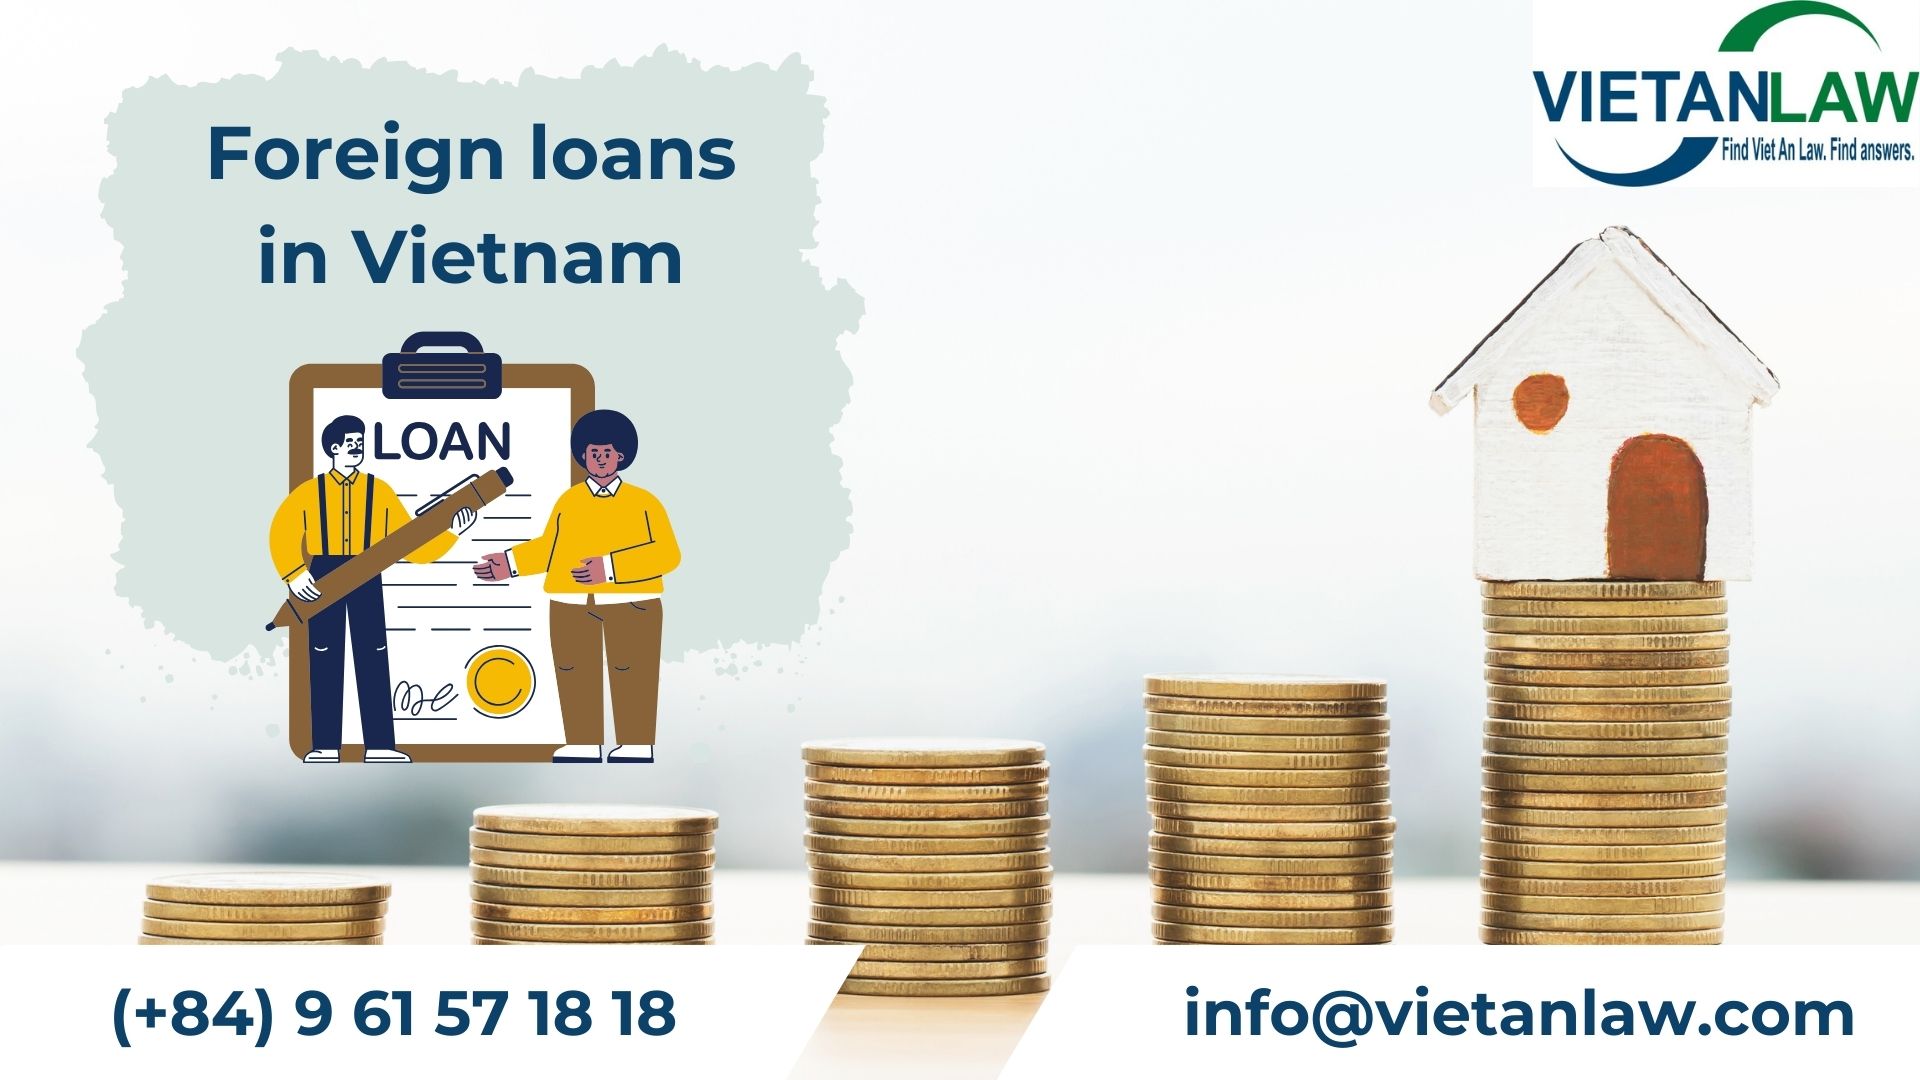 Registration of foreign loans in Vietnam